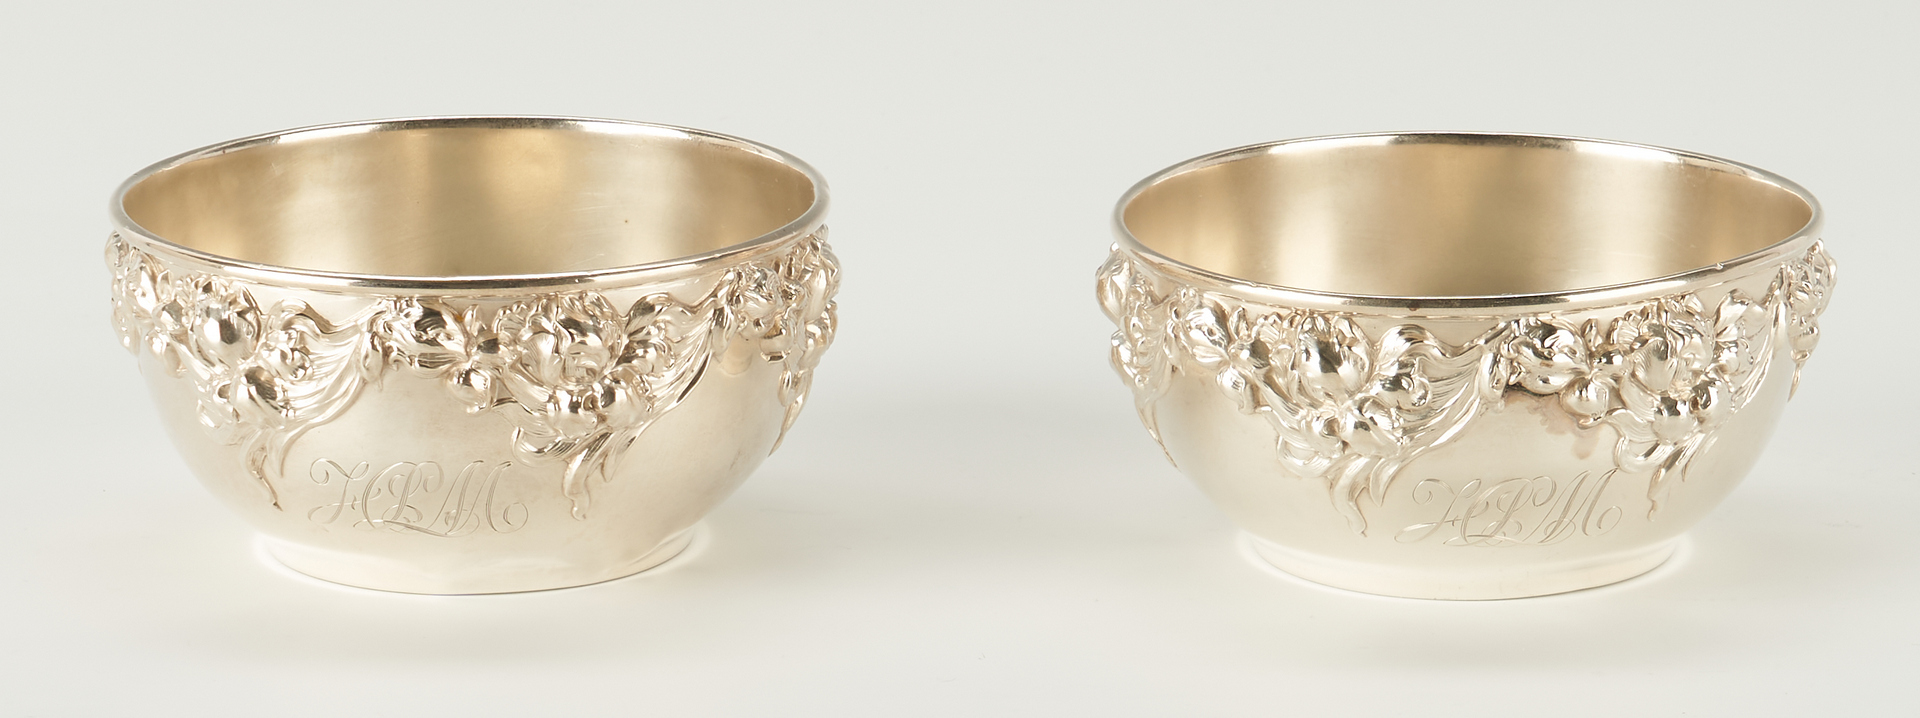 Lot 285: Set of 9 Wallace Sterling Silver Repousse Bowls